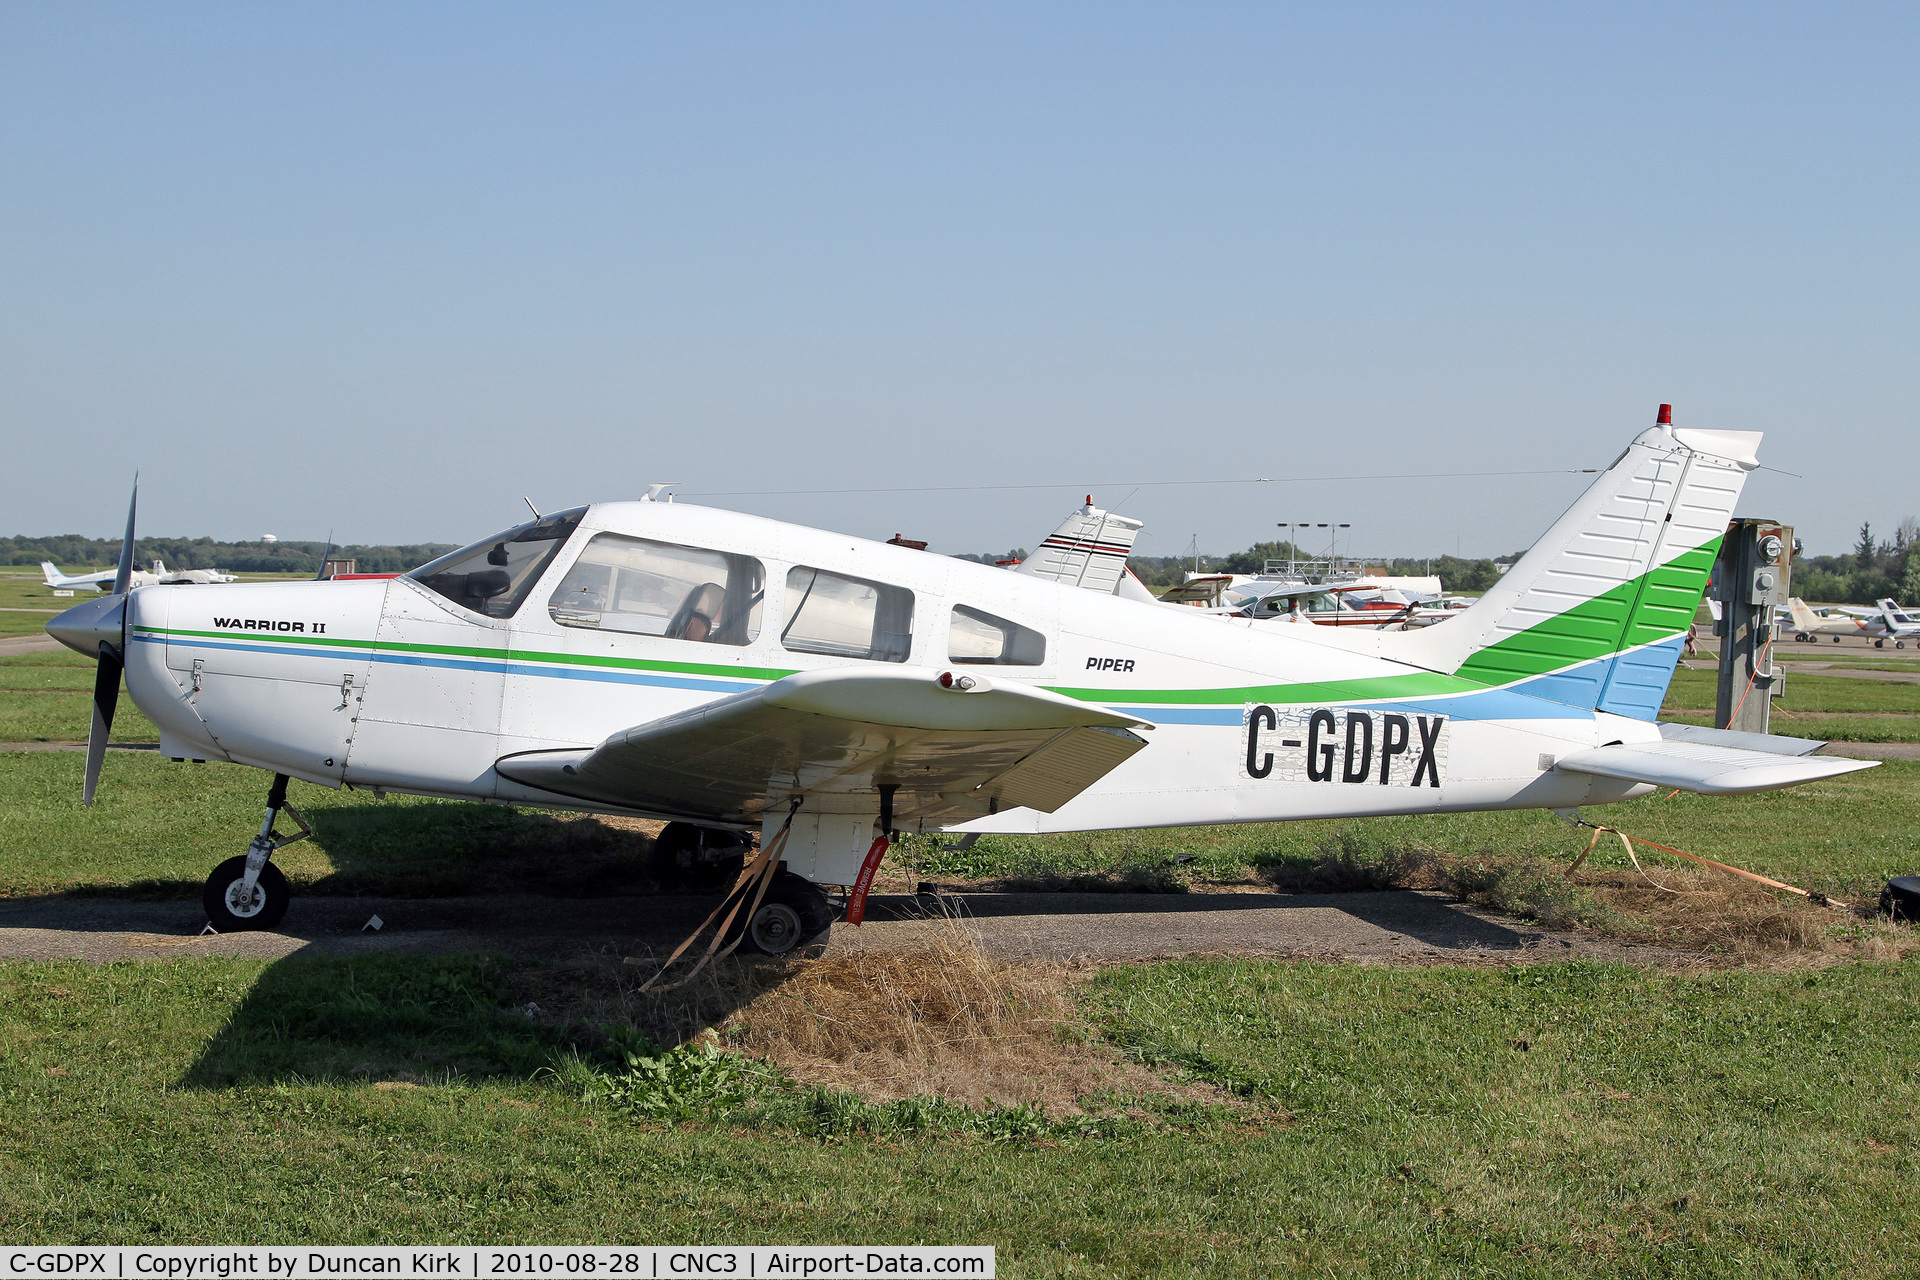 C-GDPX, 1978 Piper PA-28-161 C/N 28-7816338, Interesting application of the registration!